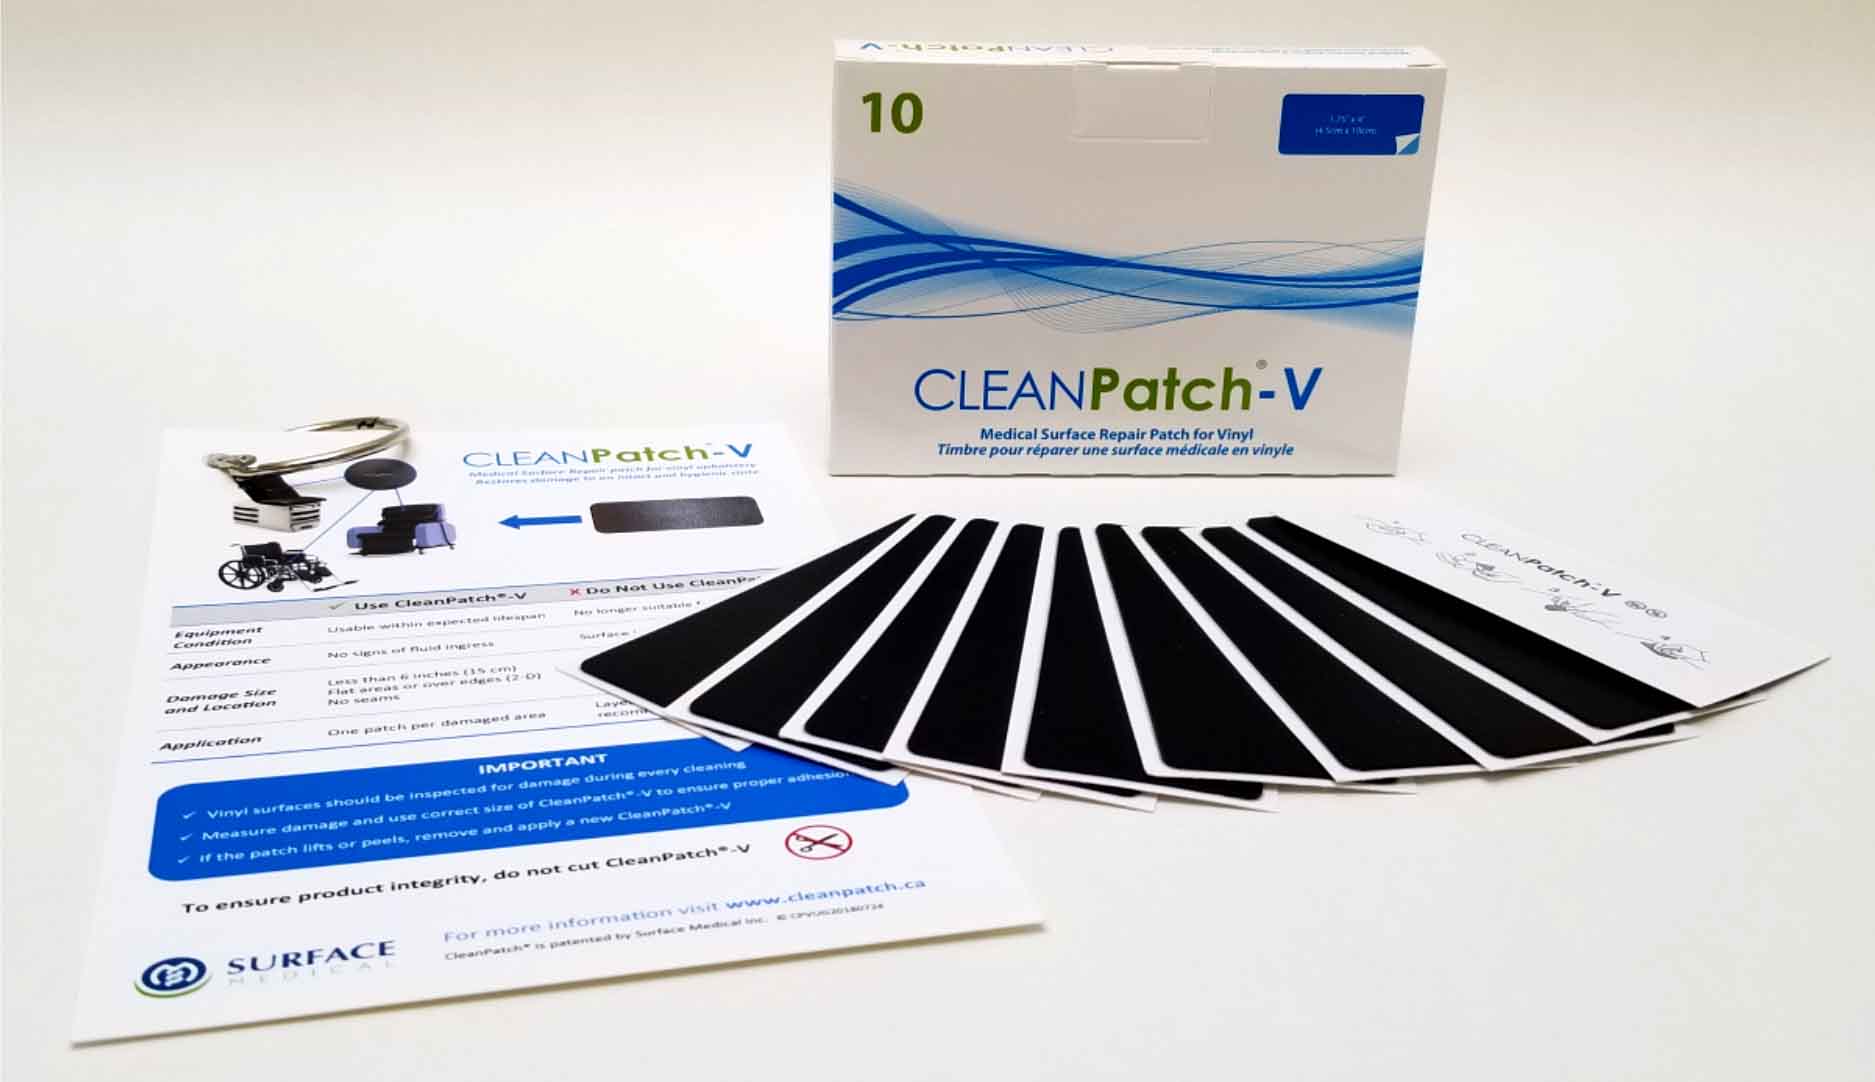 CleanPatch-V For Vinyl Surfaces, Small 1.75" x 4" strip (4.45*10 cm), 10/box